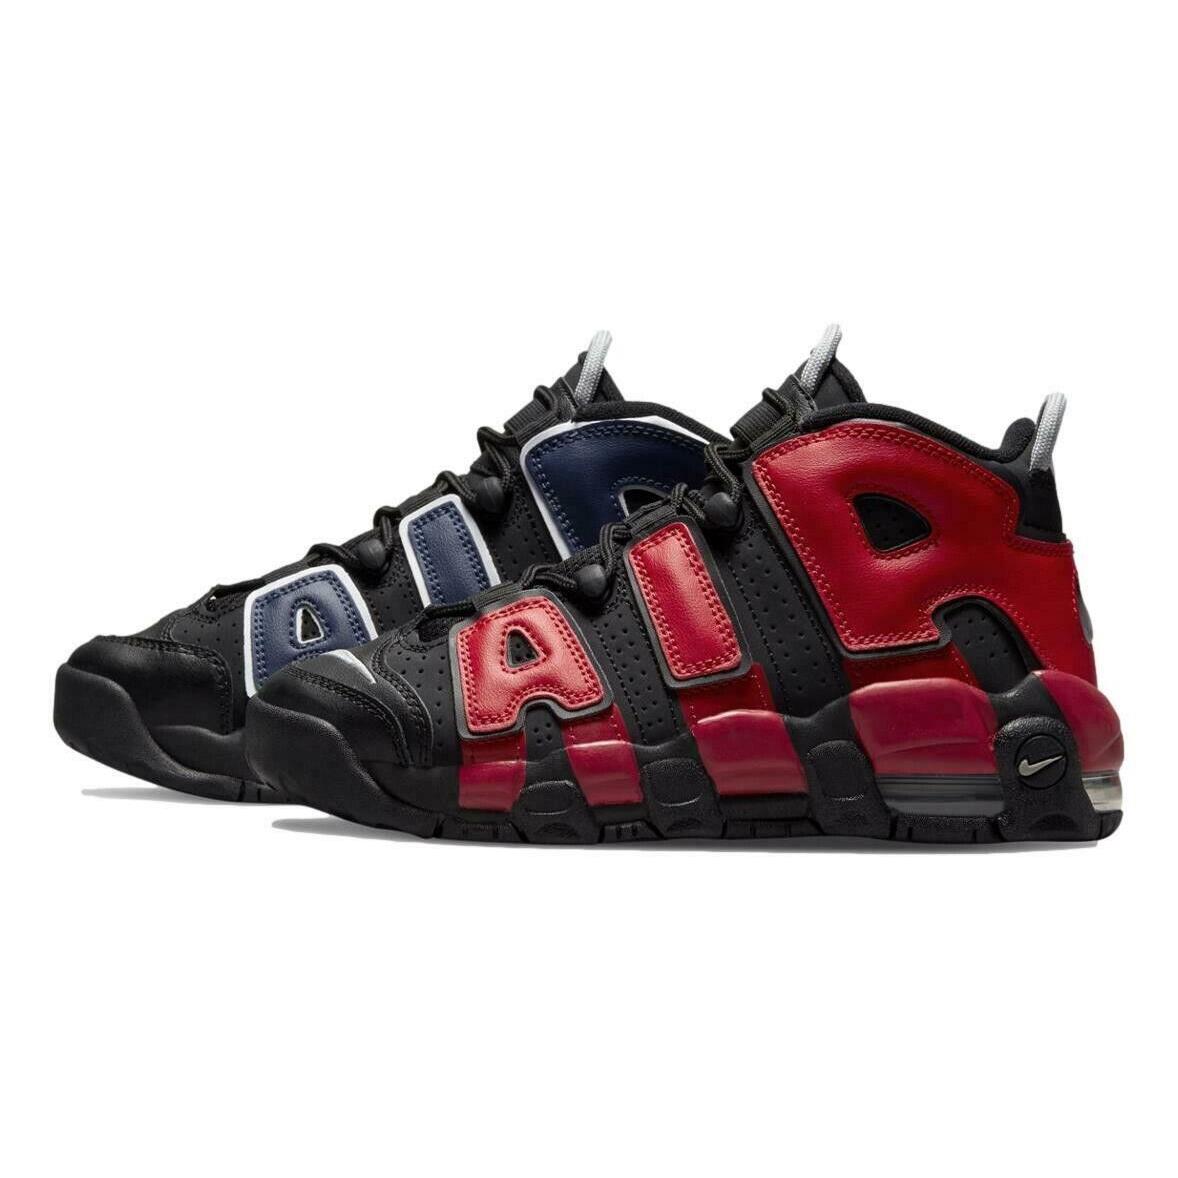 Nike Air More Uptempo Sneakers 5Y Black University Red Shoes Retro Kids